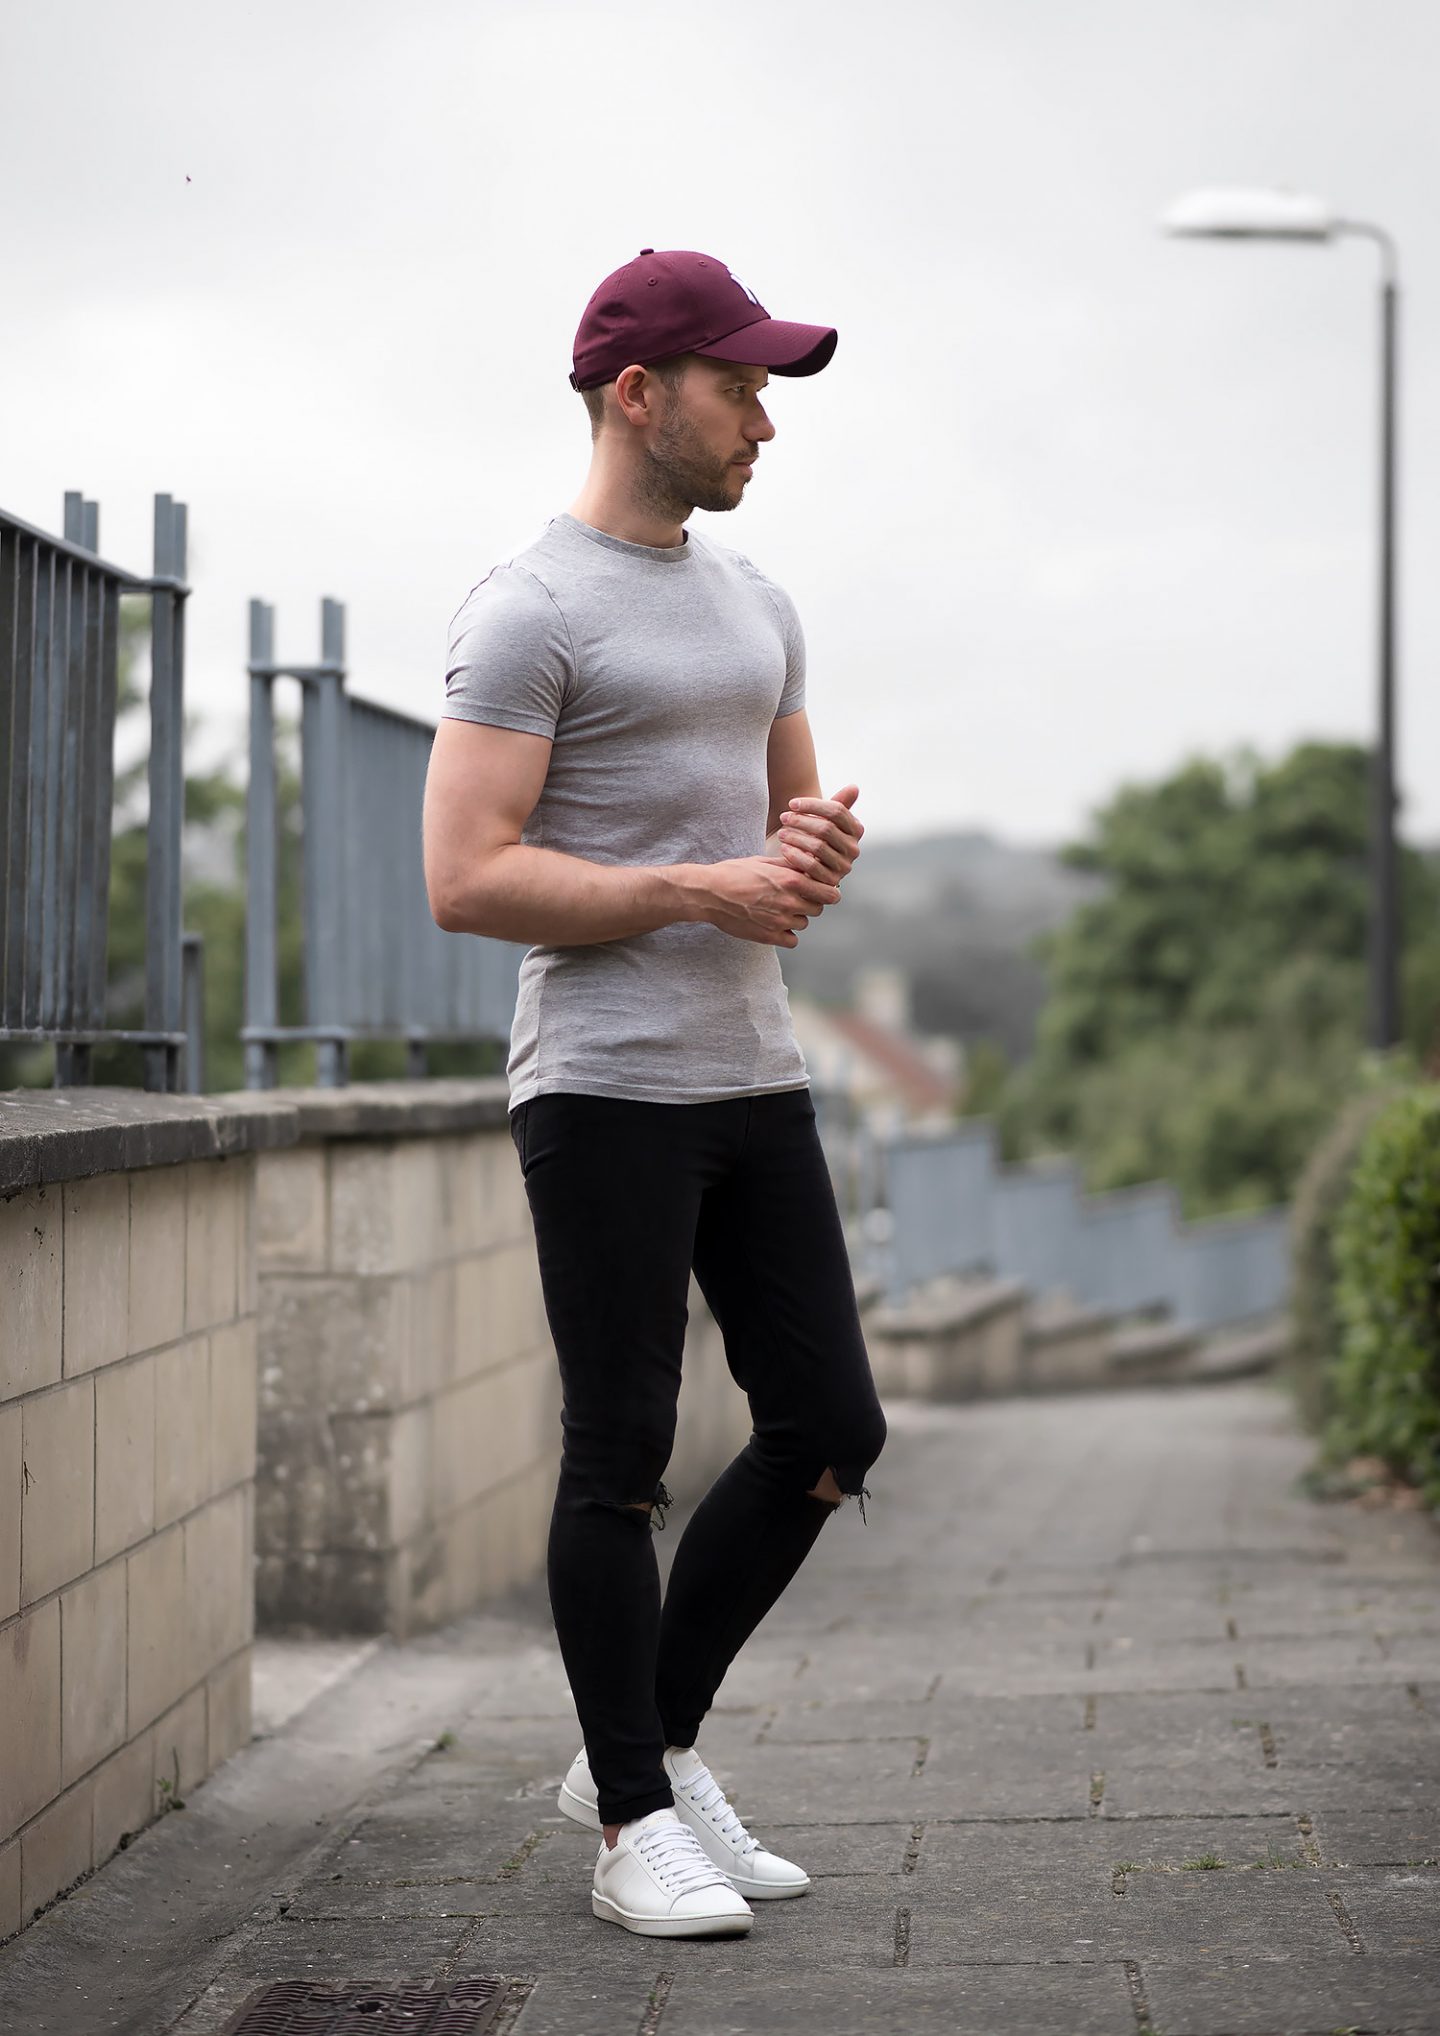 Casual Style ASOS T Shirt And Skinny Jeans Outfit - Your Average Guy